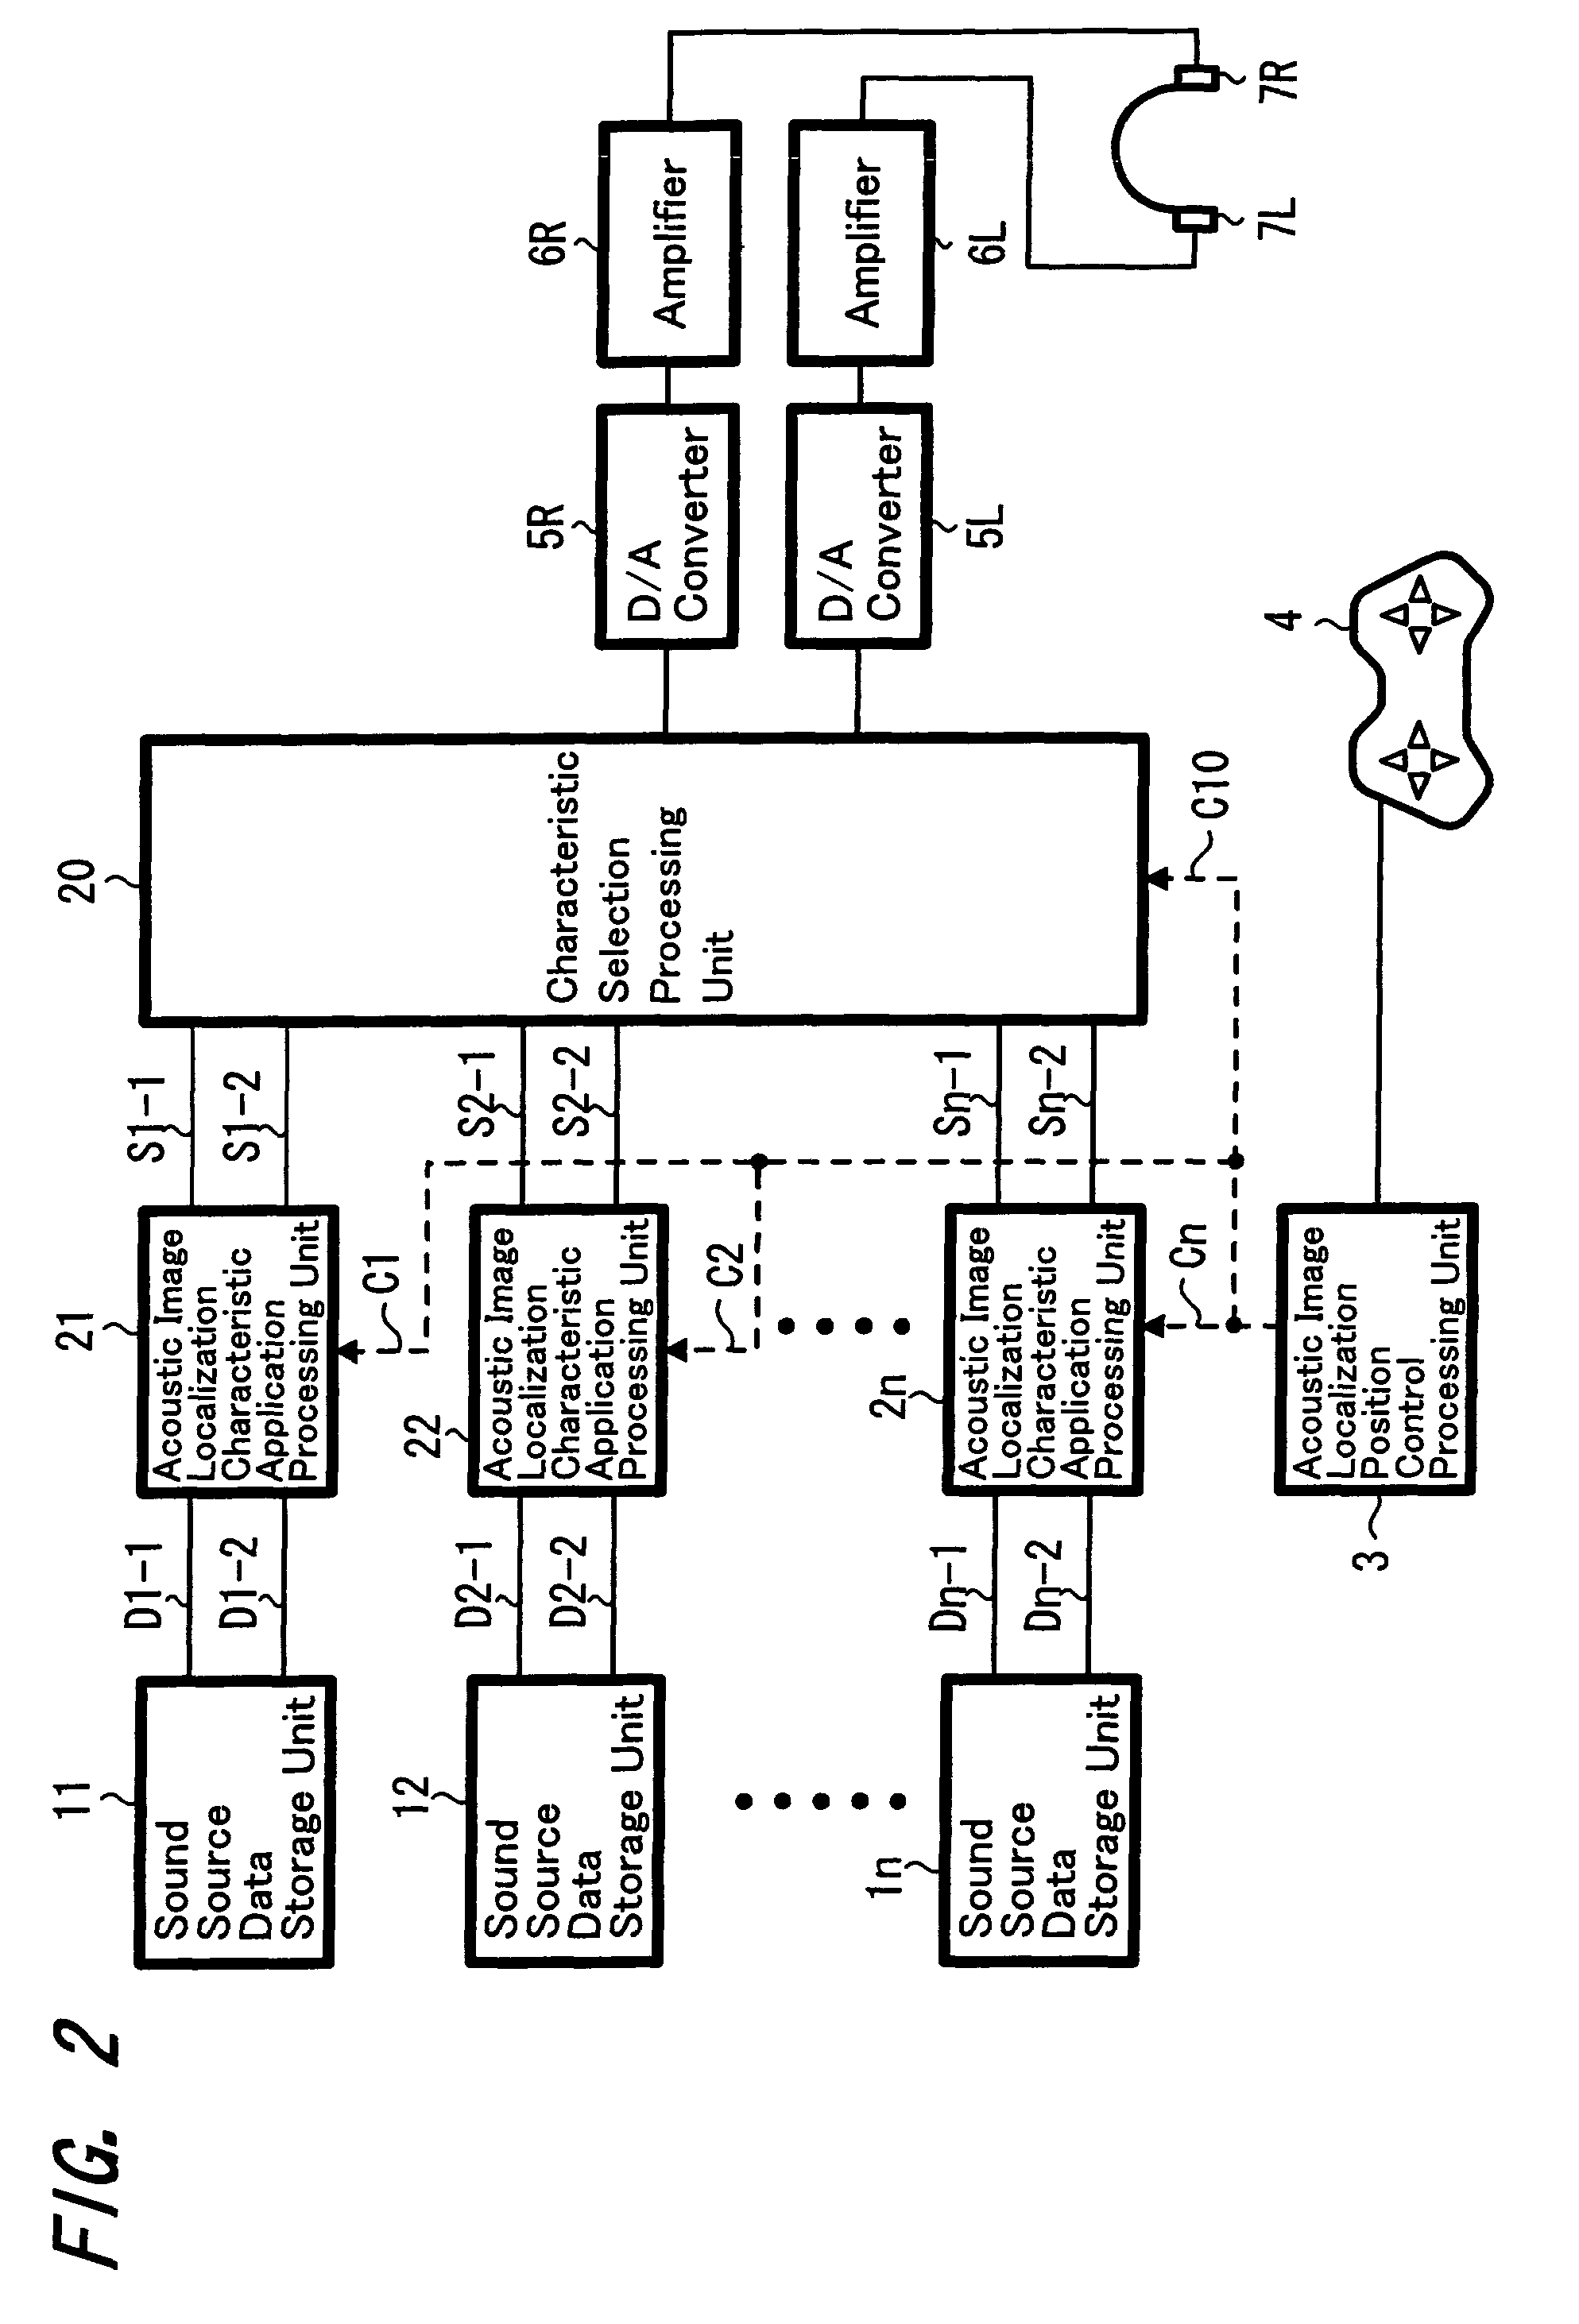 Acoustic image localization signal processing device